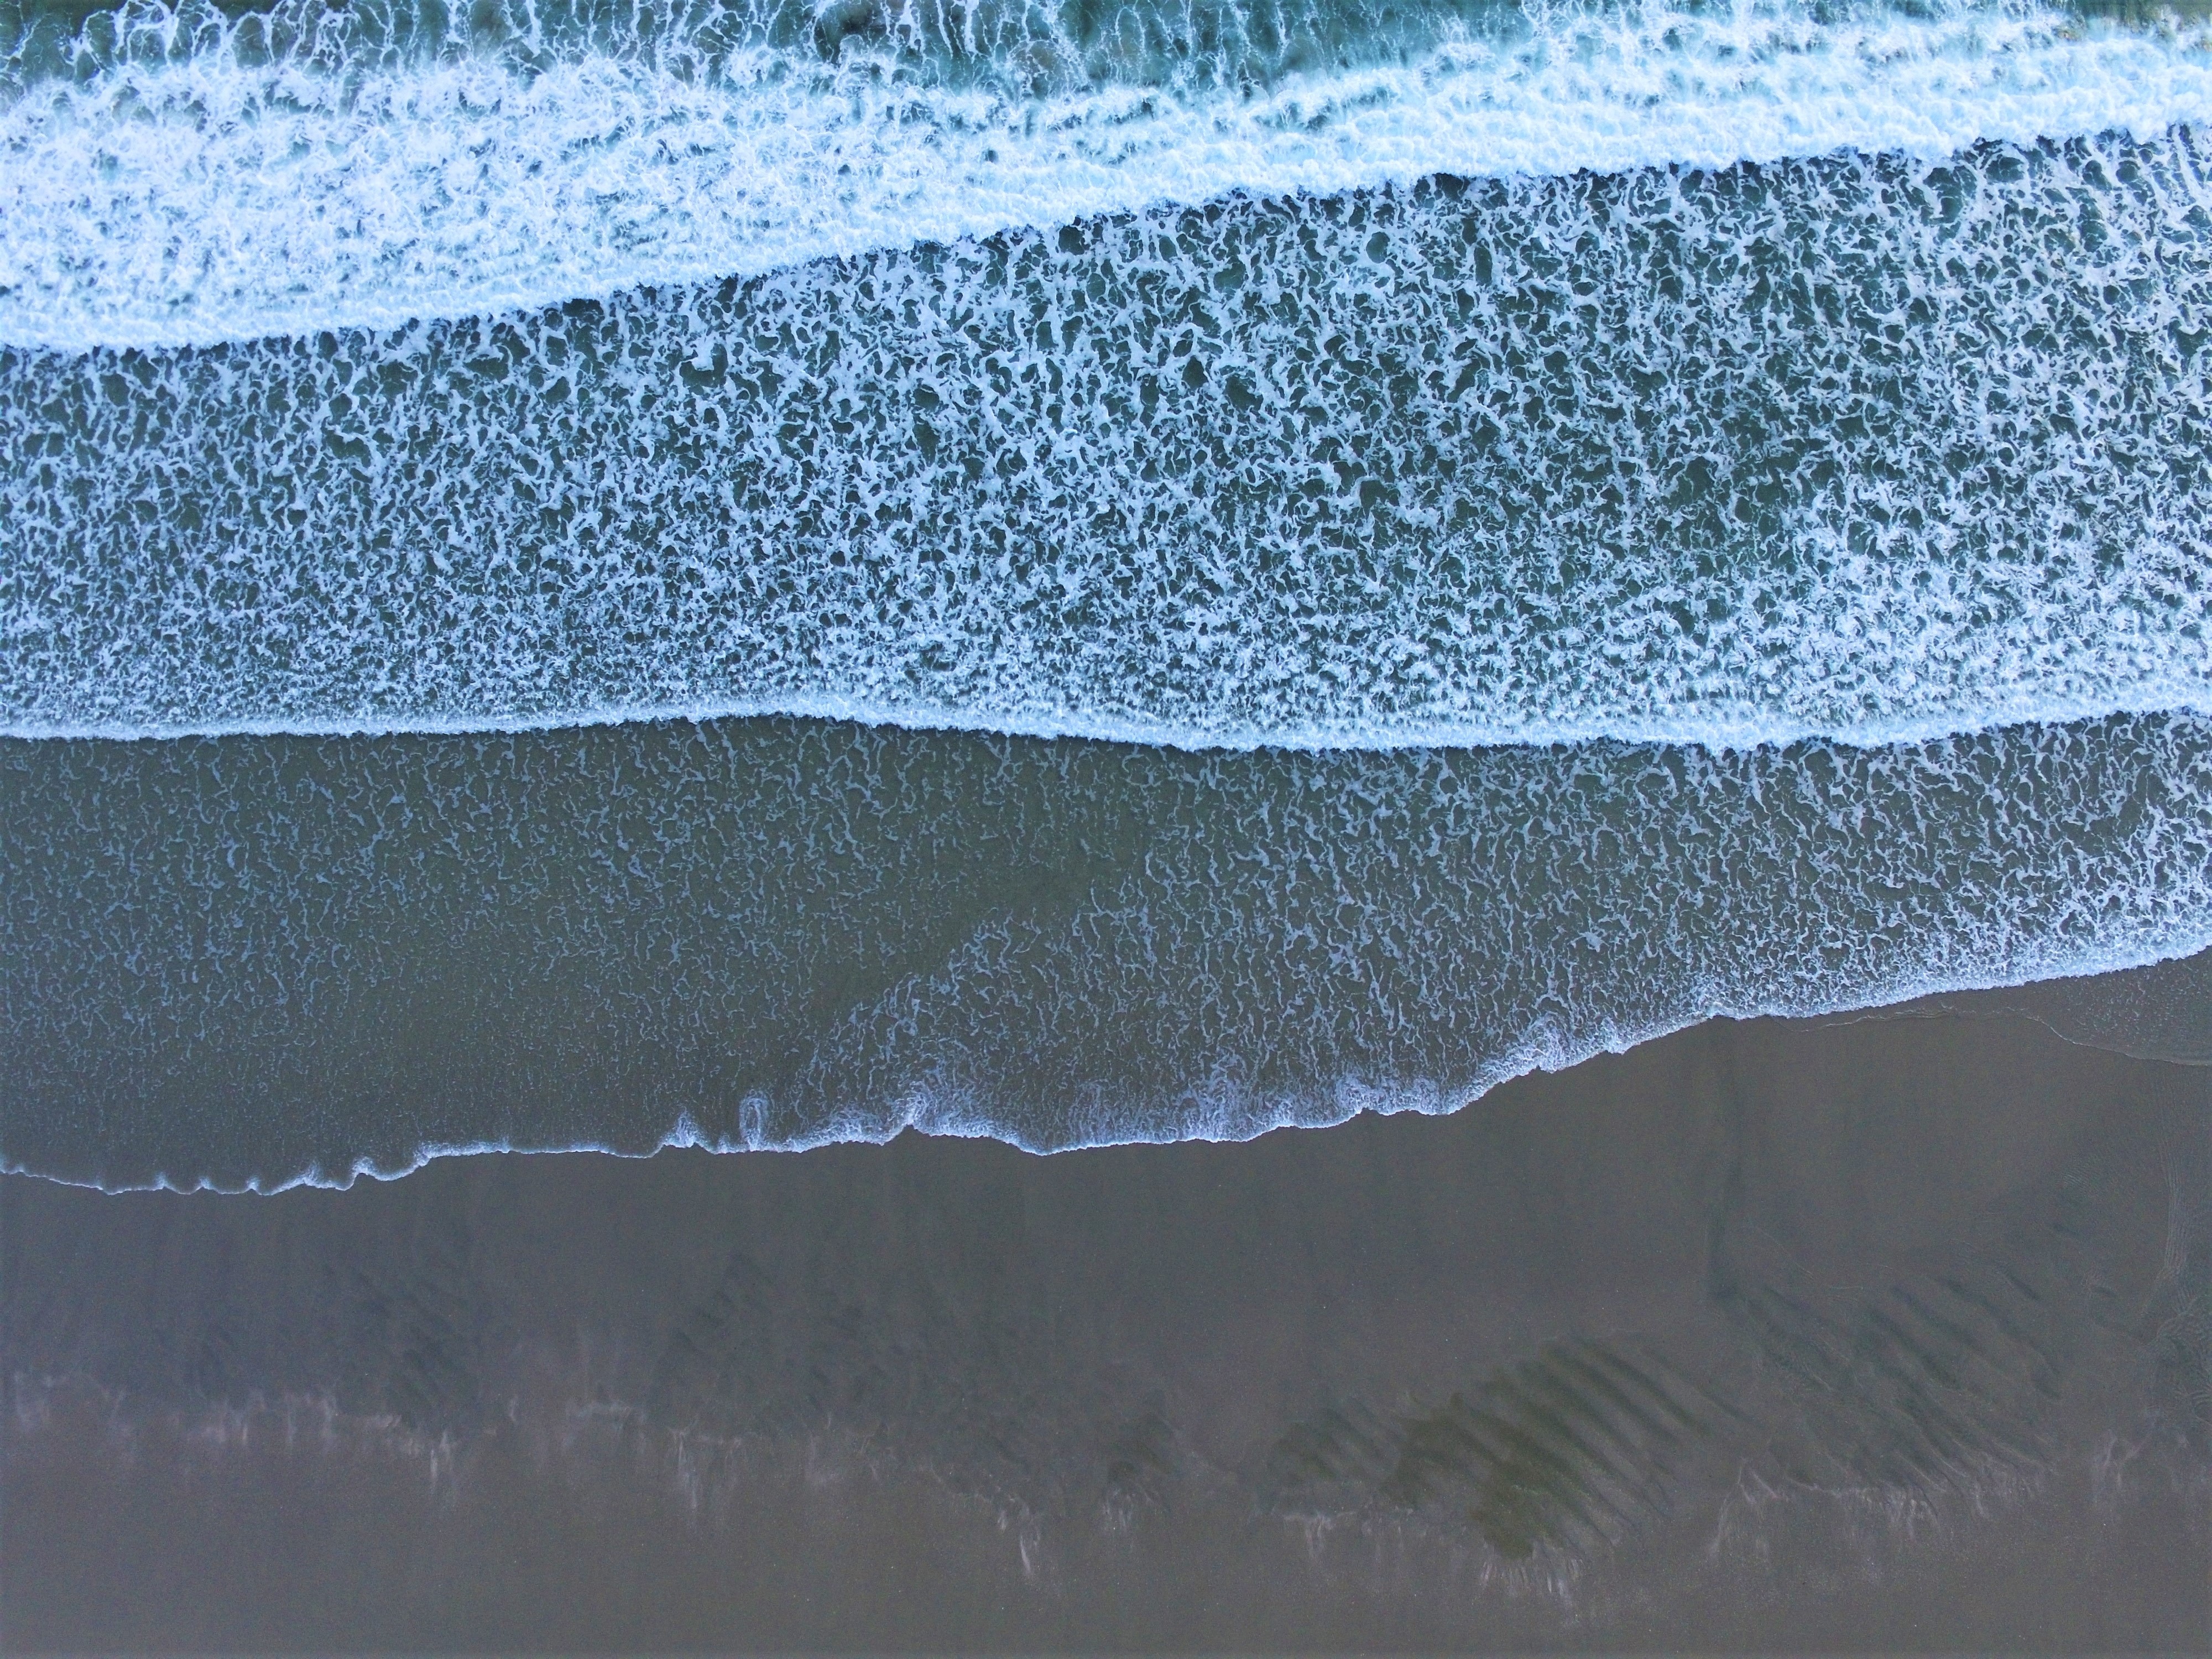 desktop Images nature, sea, waves, beach, view from above, surf